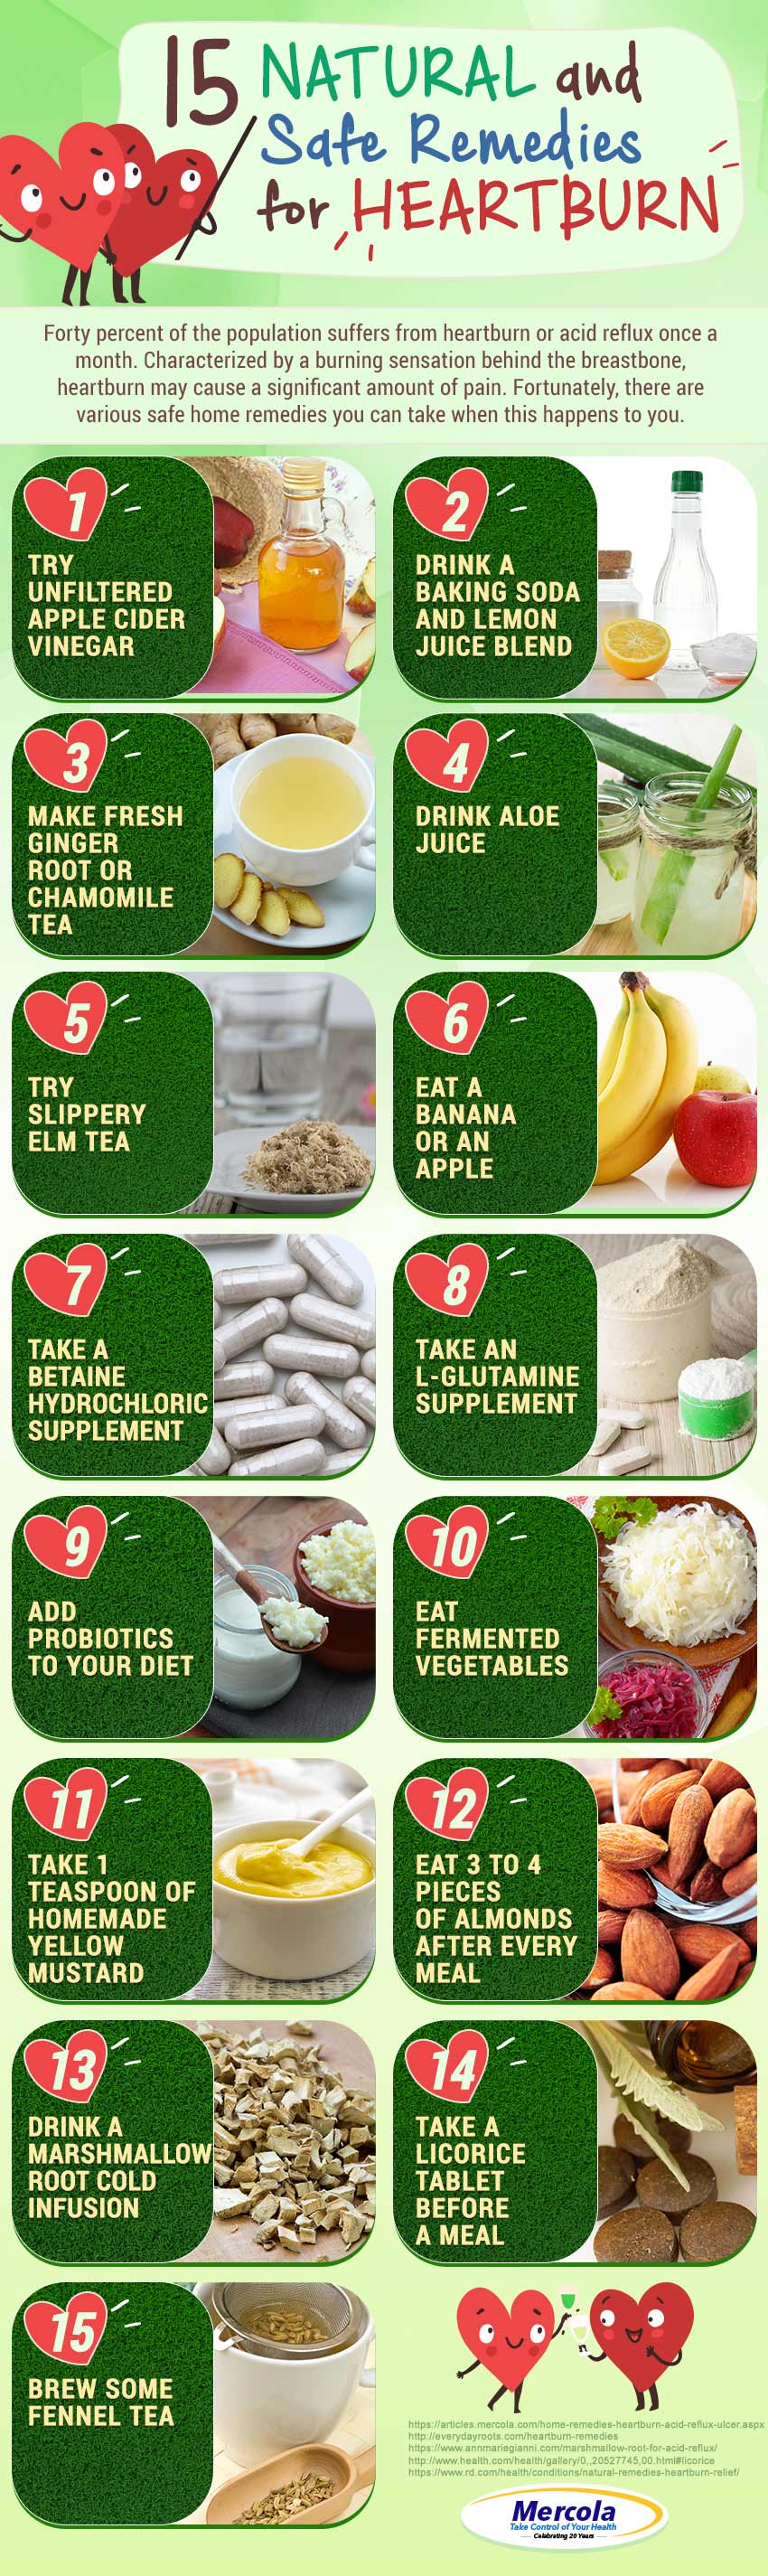 15 natural and safe remedies for heartburn